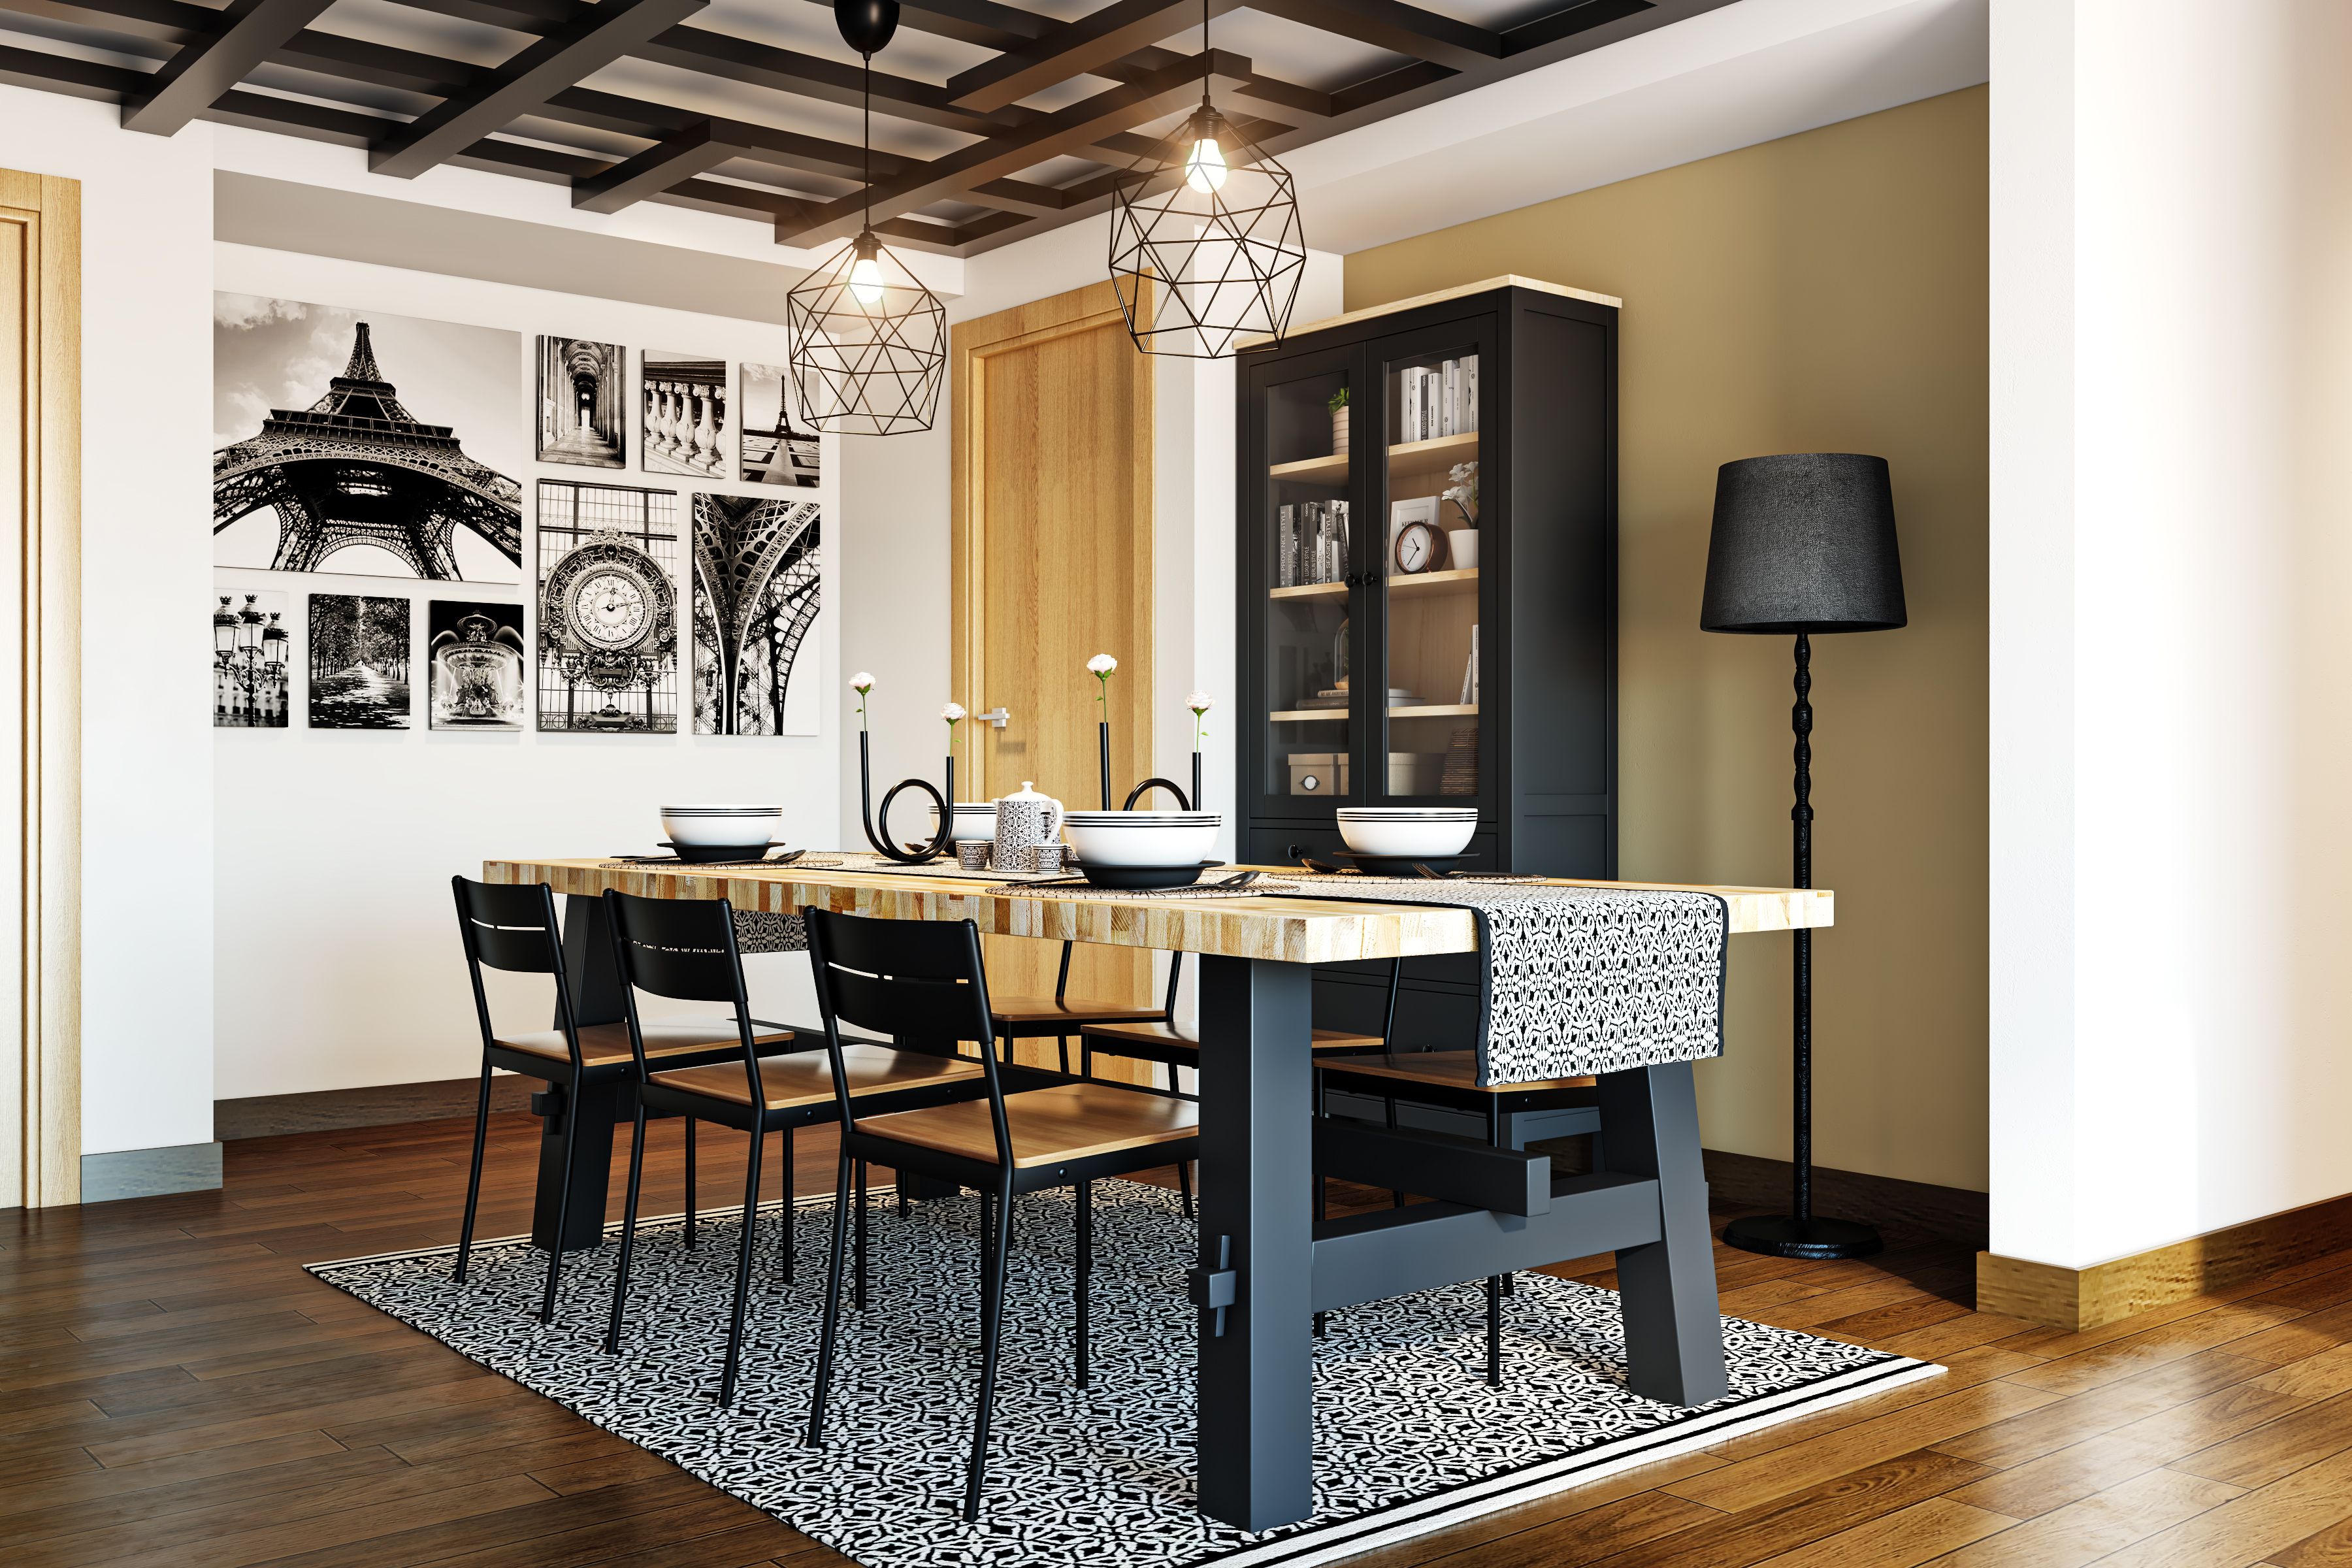 Modern Dining Room Design With Floor Lamp And Pendant Lights